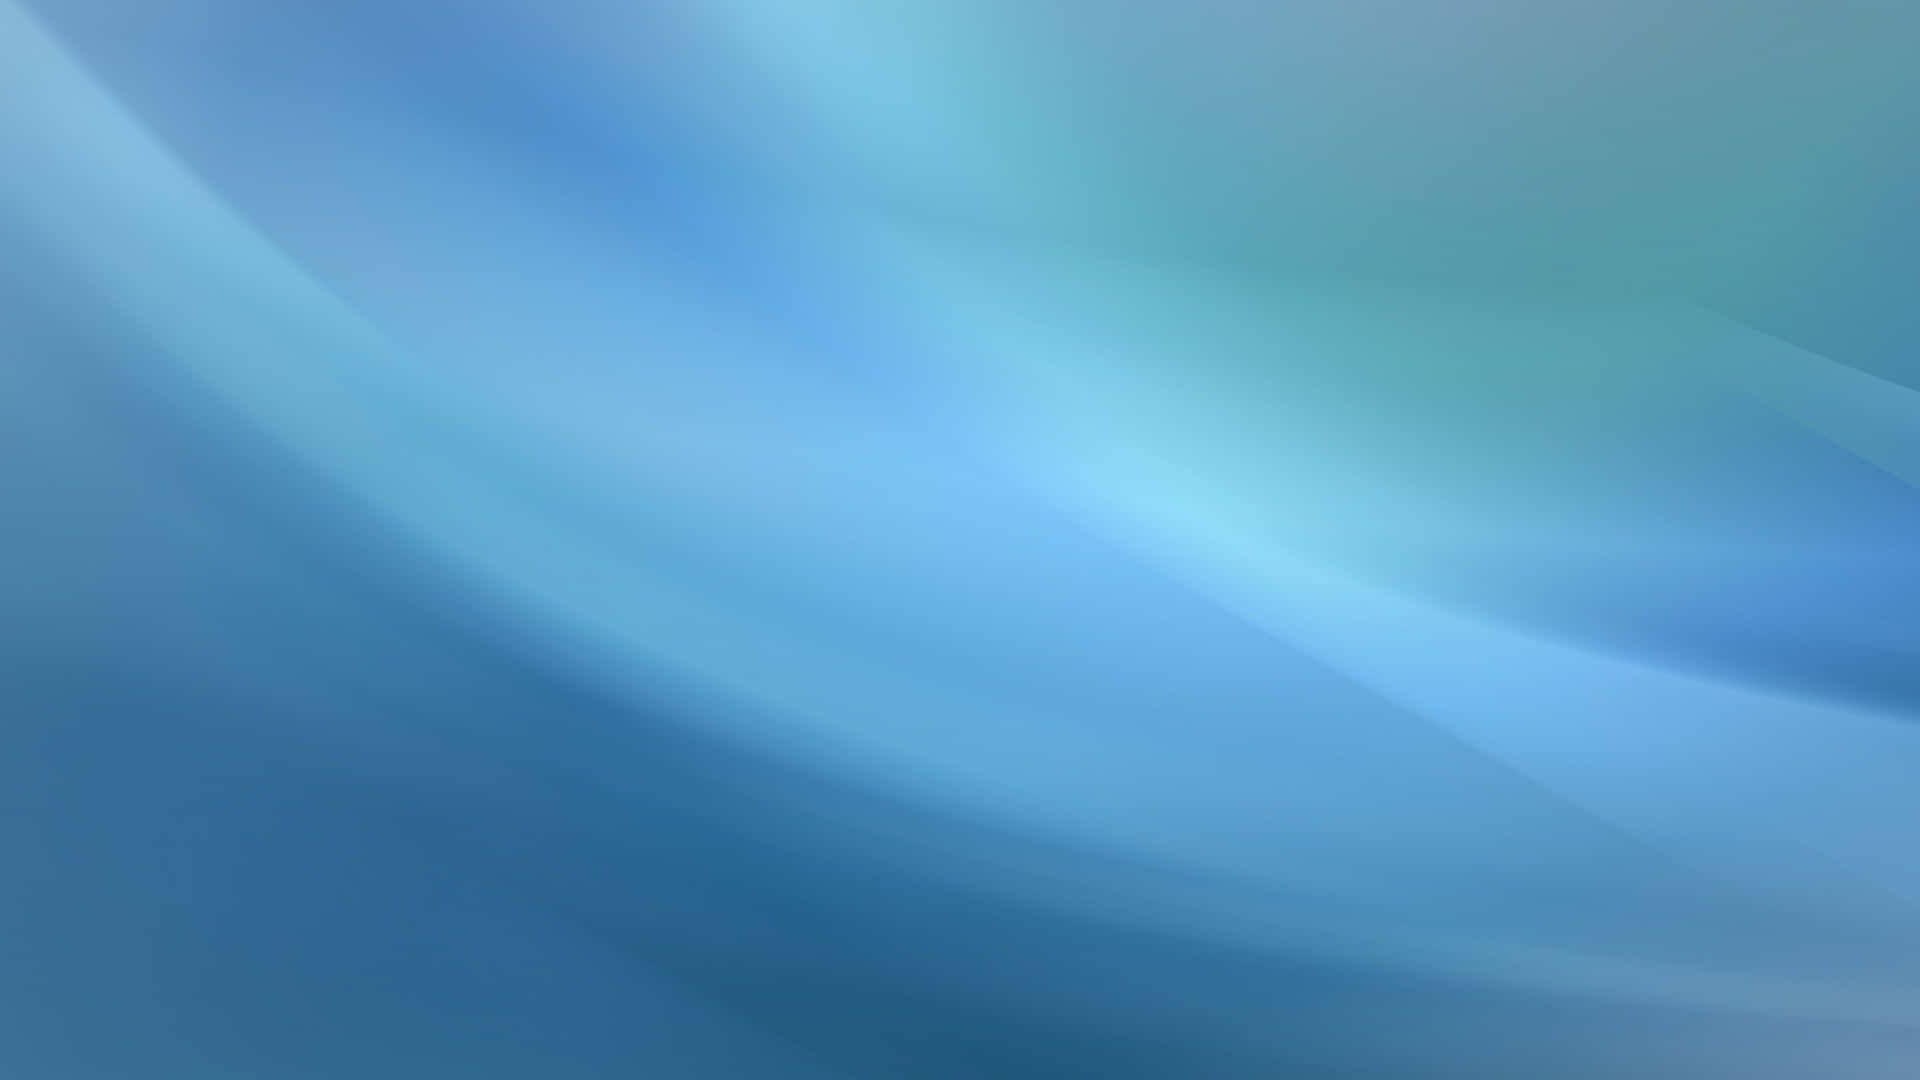 Cool Light Blue With Lines Wallpaper